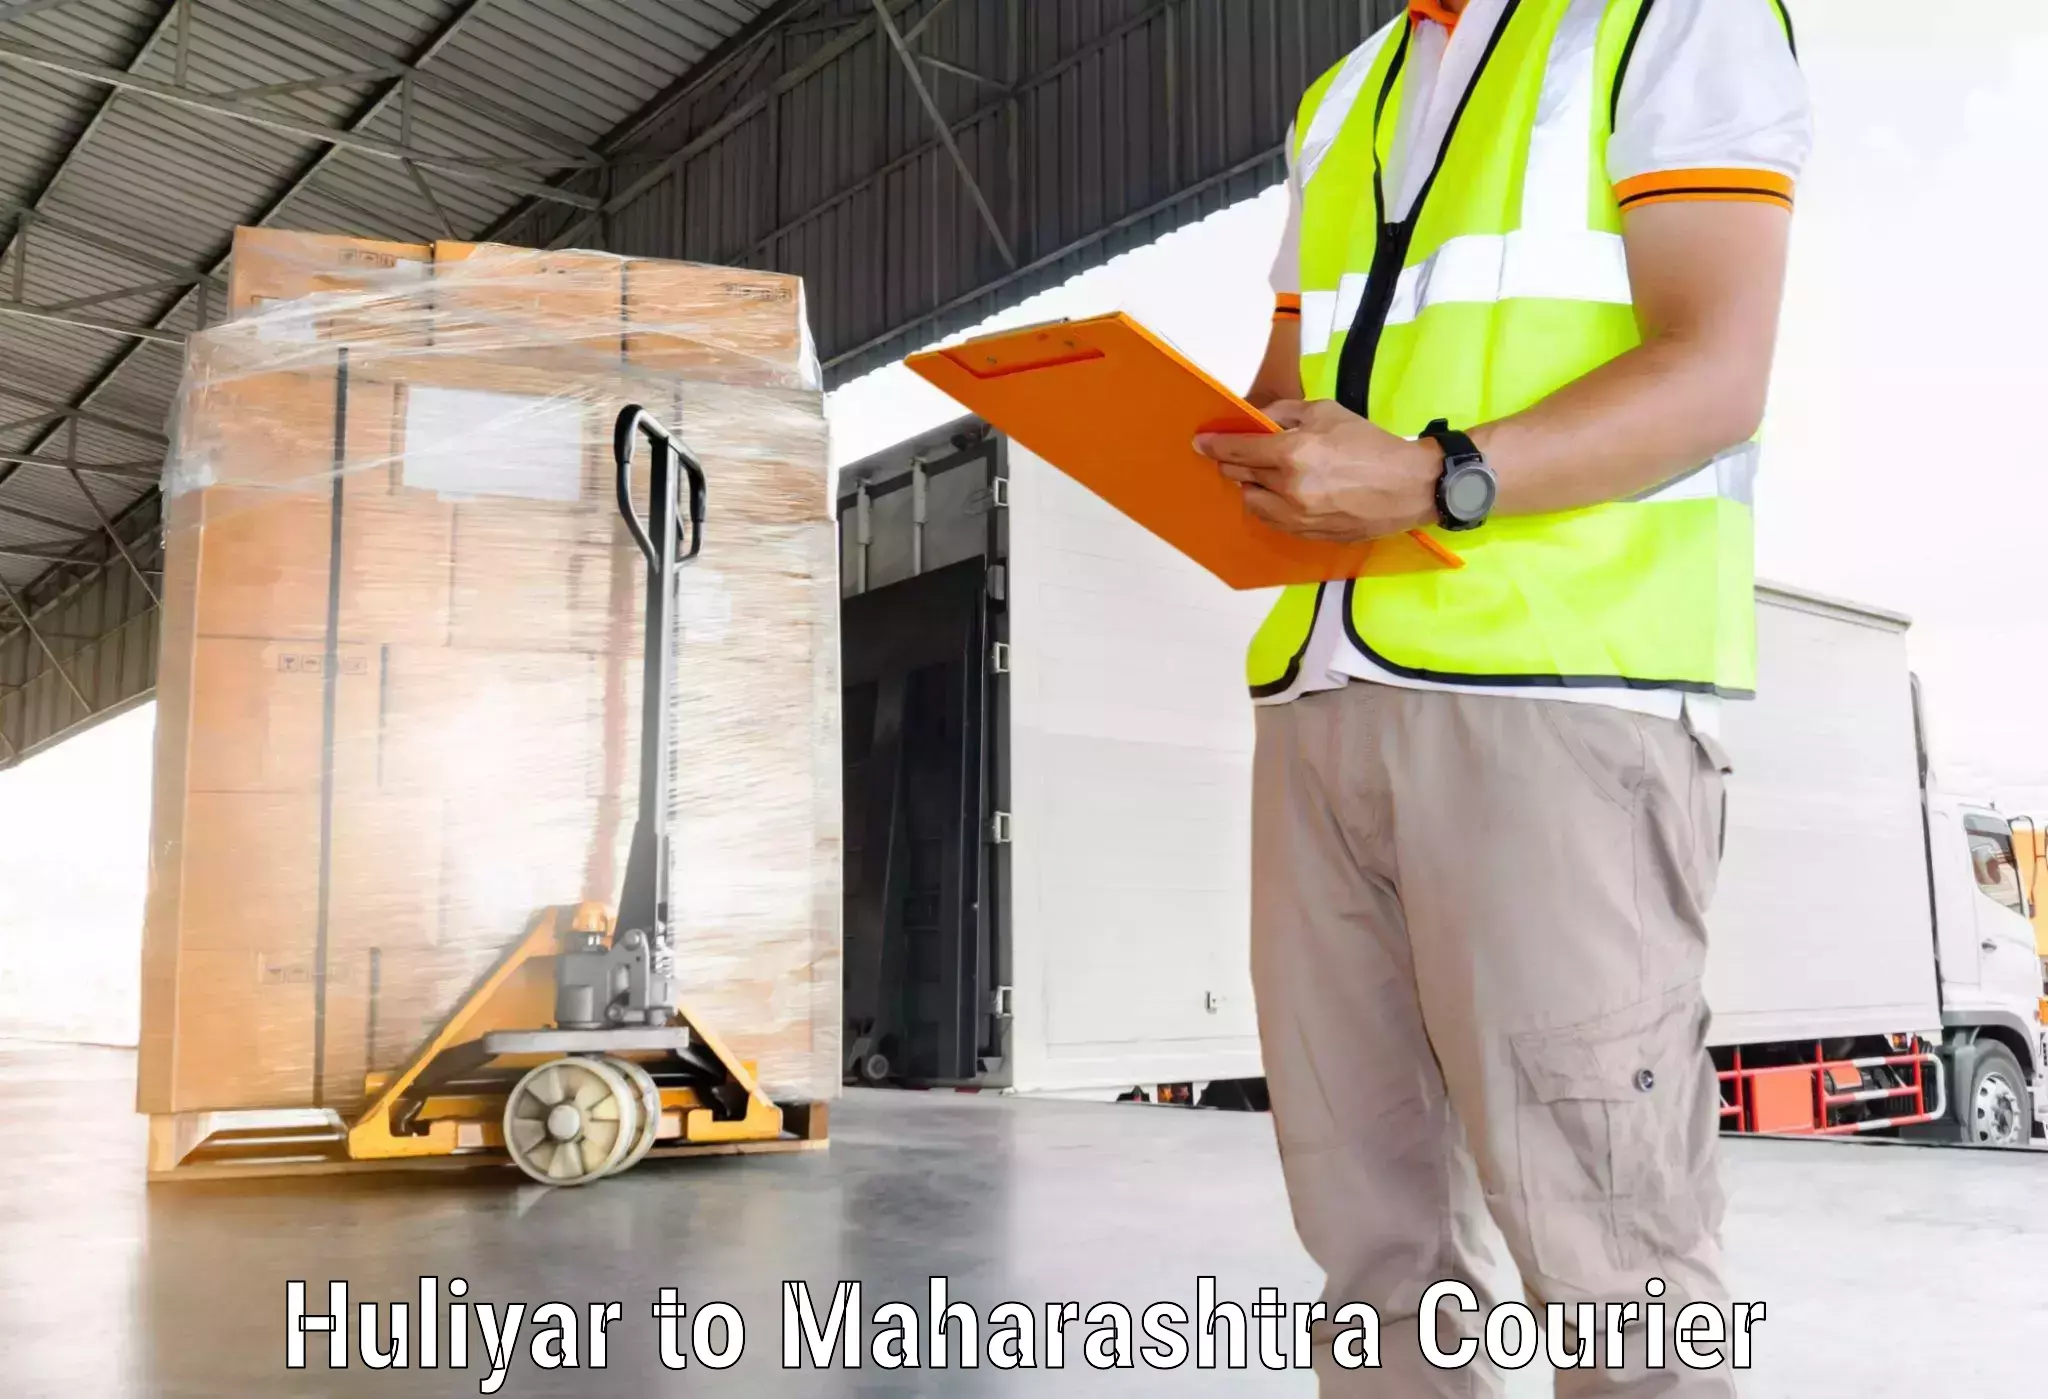 Courier service comparison in Huliyar to Maharashtra